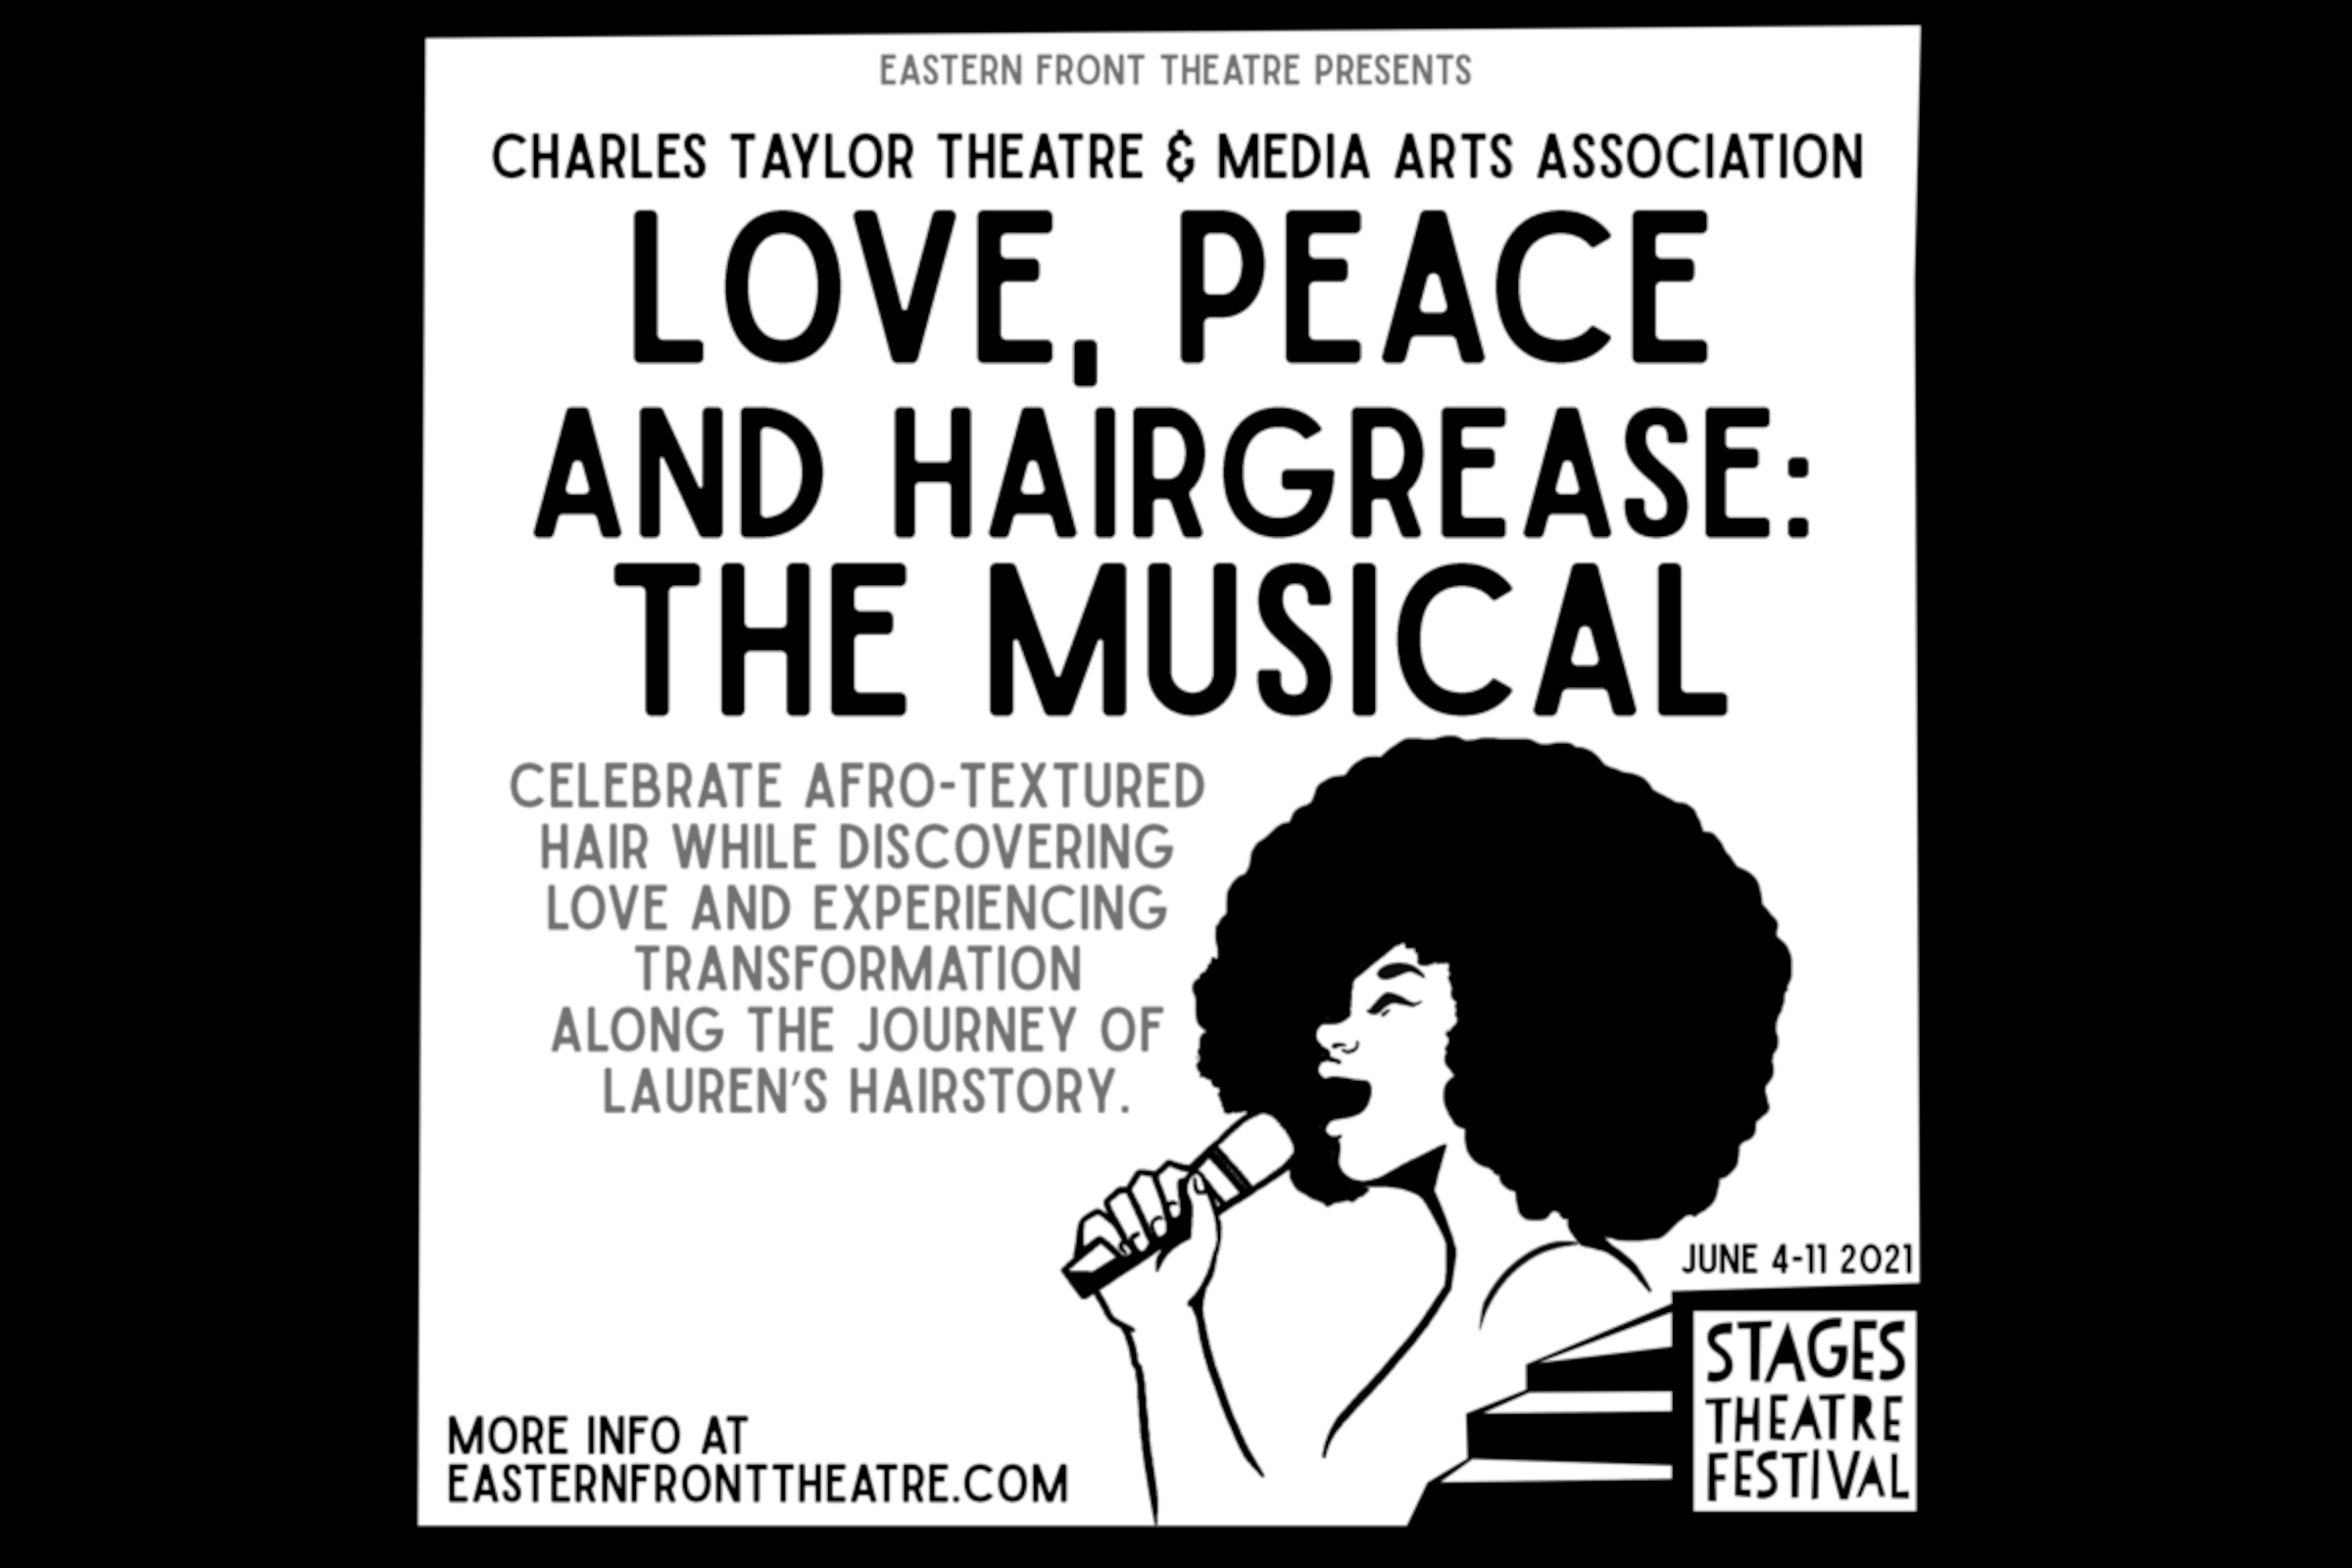 Poster for "Love, Peace and Hairgrease: The Musical"